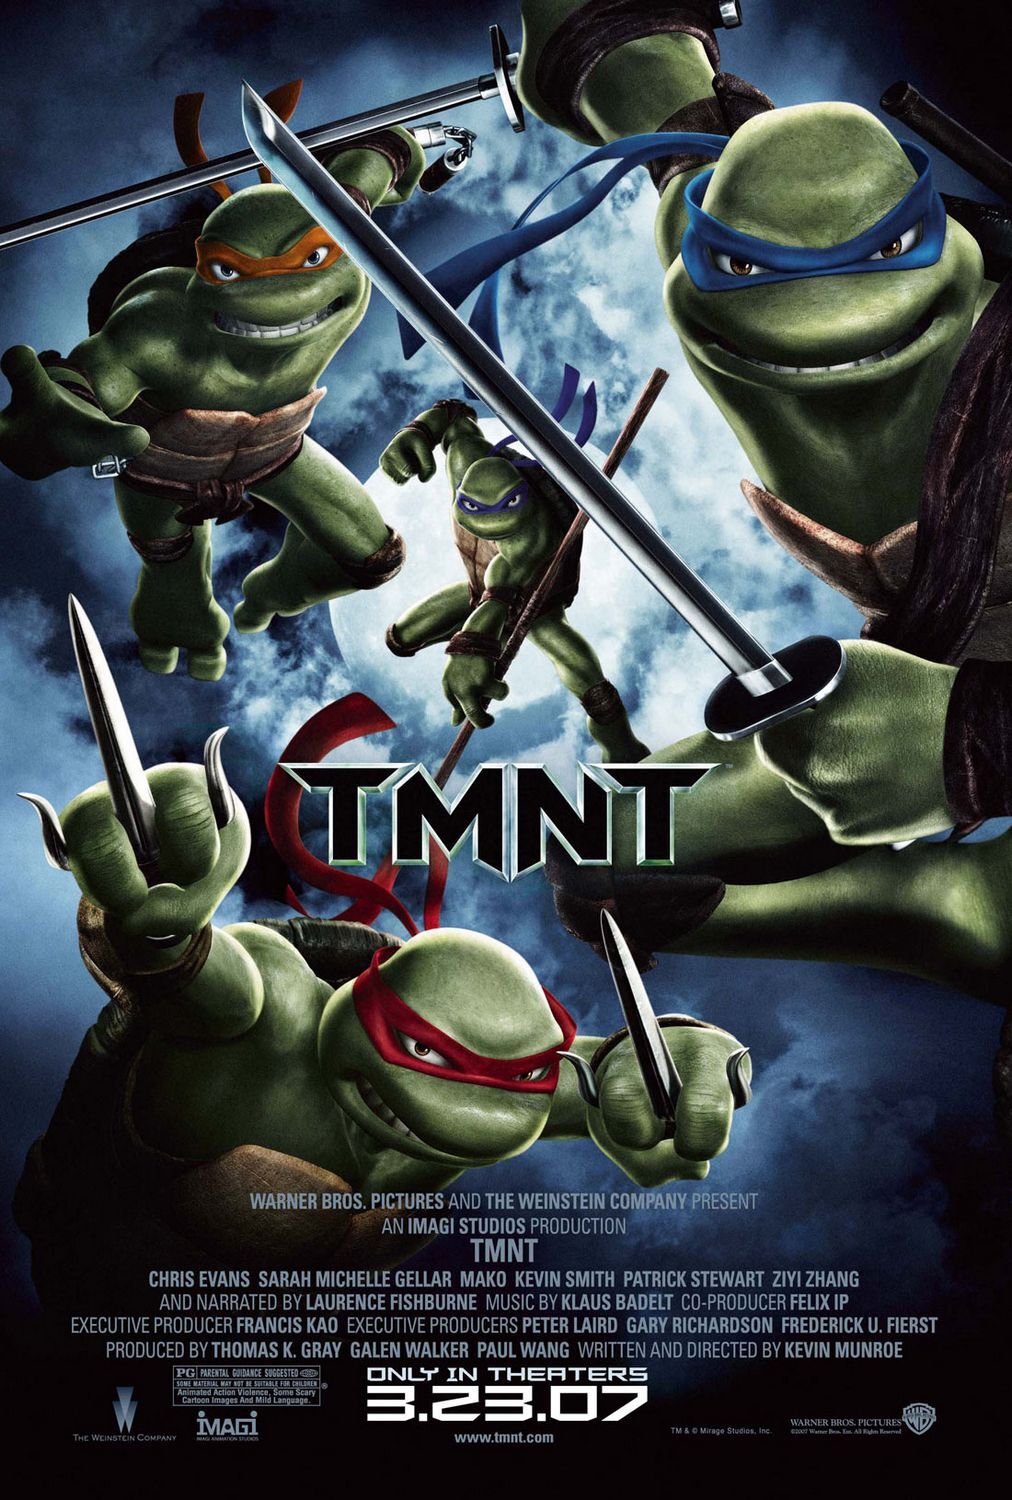 https://static.wikia.nocookie.net/greatestmovies/images/0/03/TMNT.jpg/revision/latest/scale-to-width-down/1012?cb=20221025084319